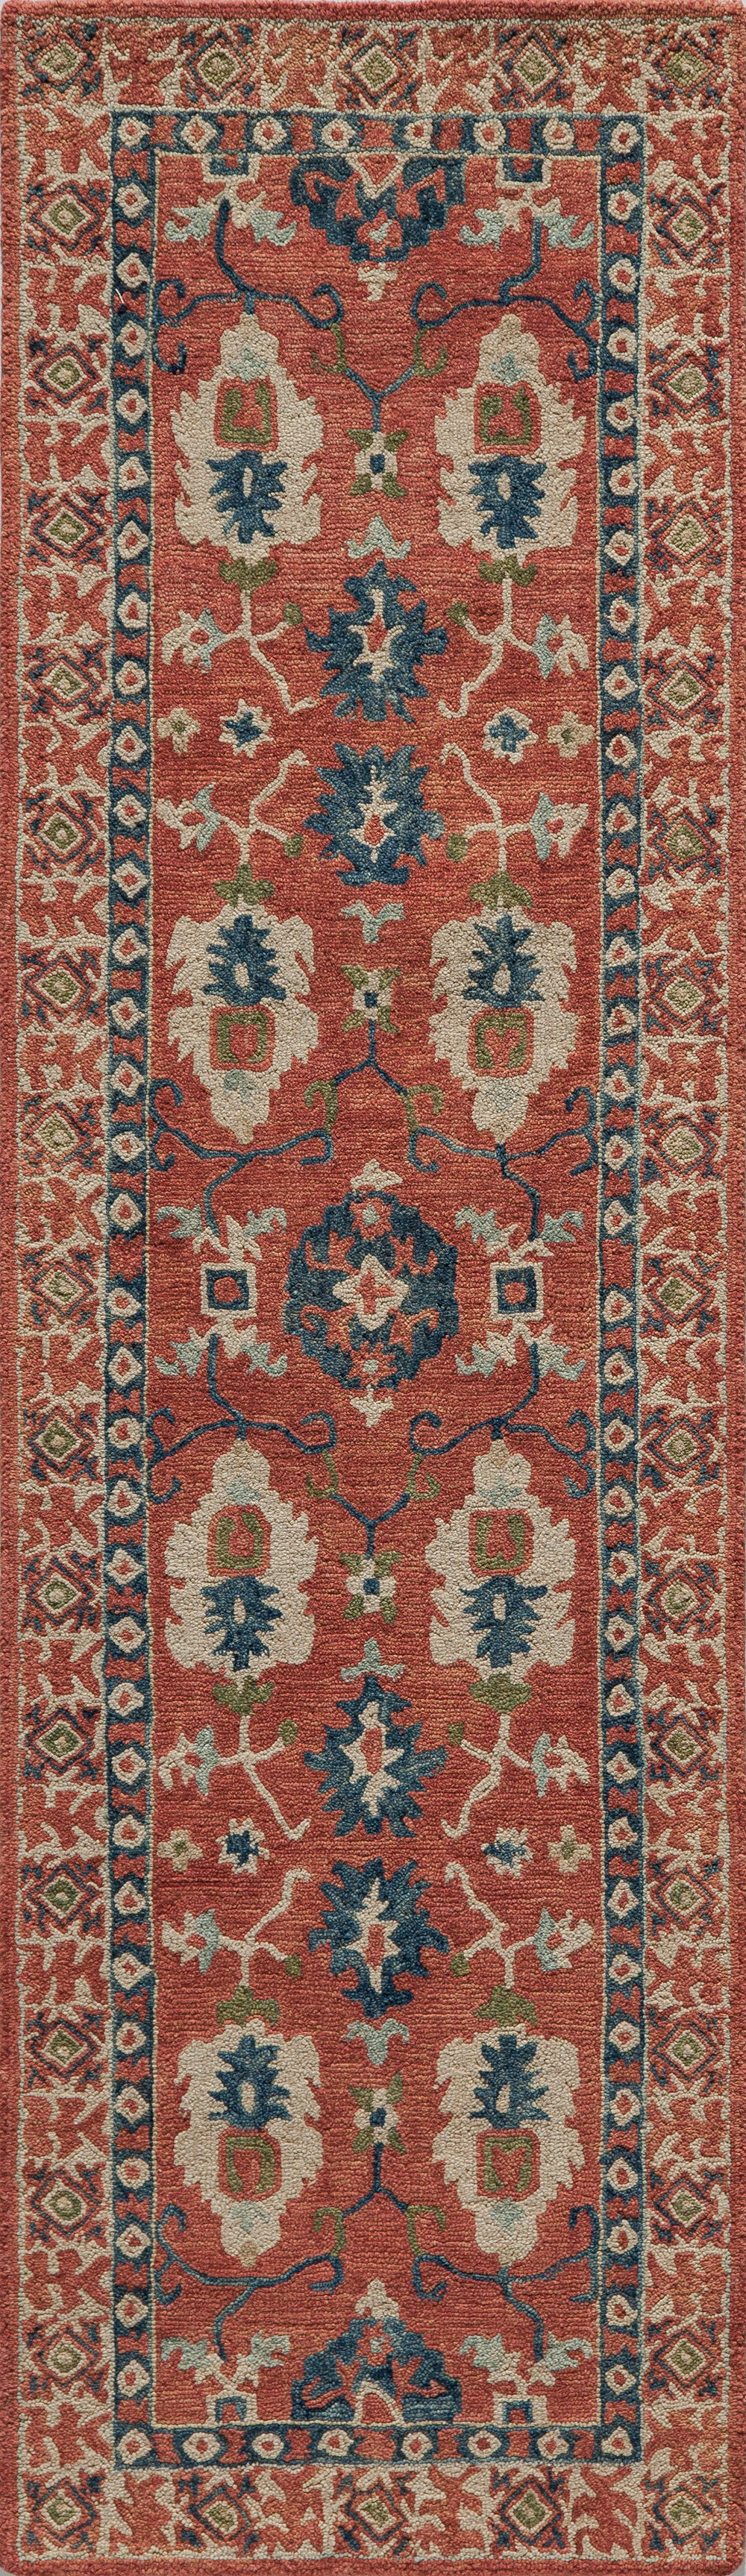 Tangier Traditional Oriental Red Hand-Tufted Wool Rug